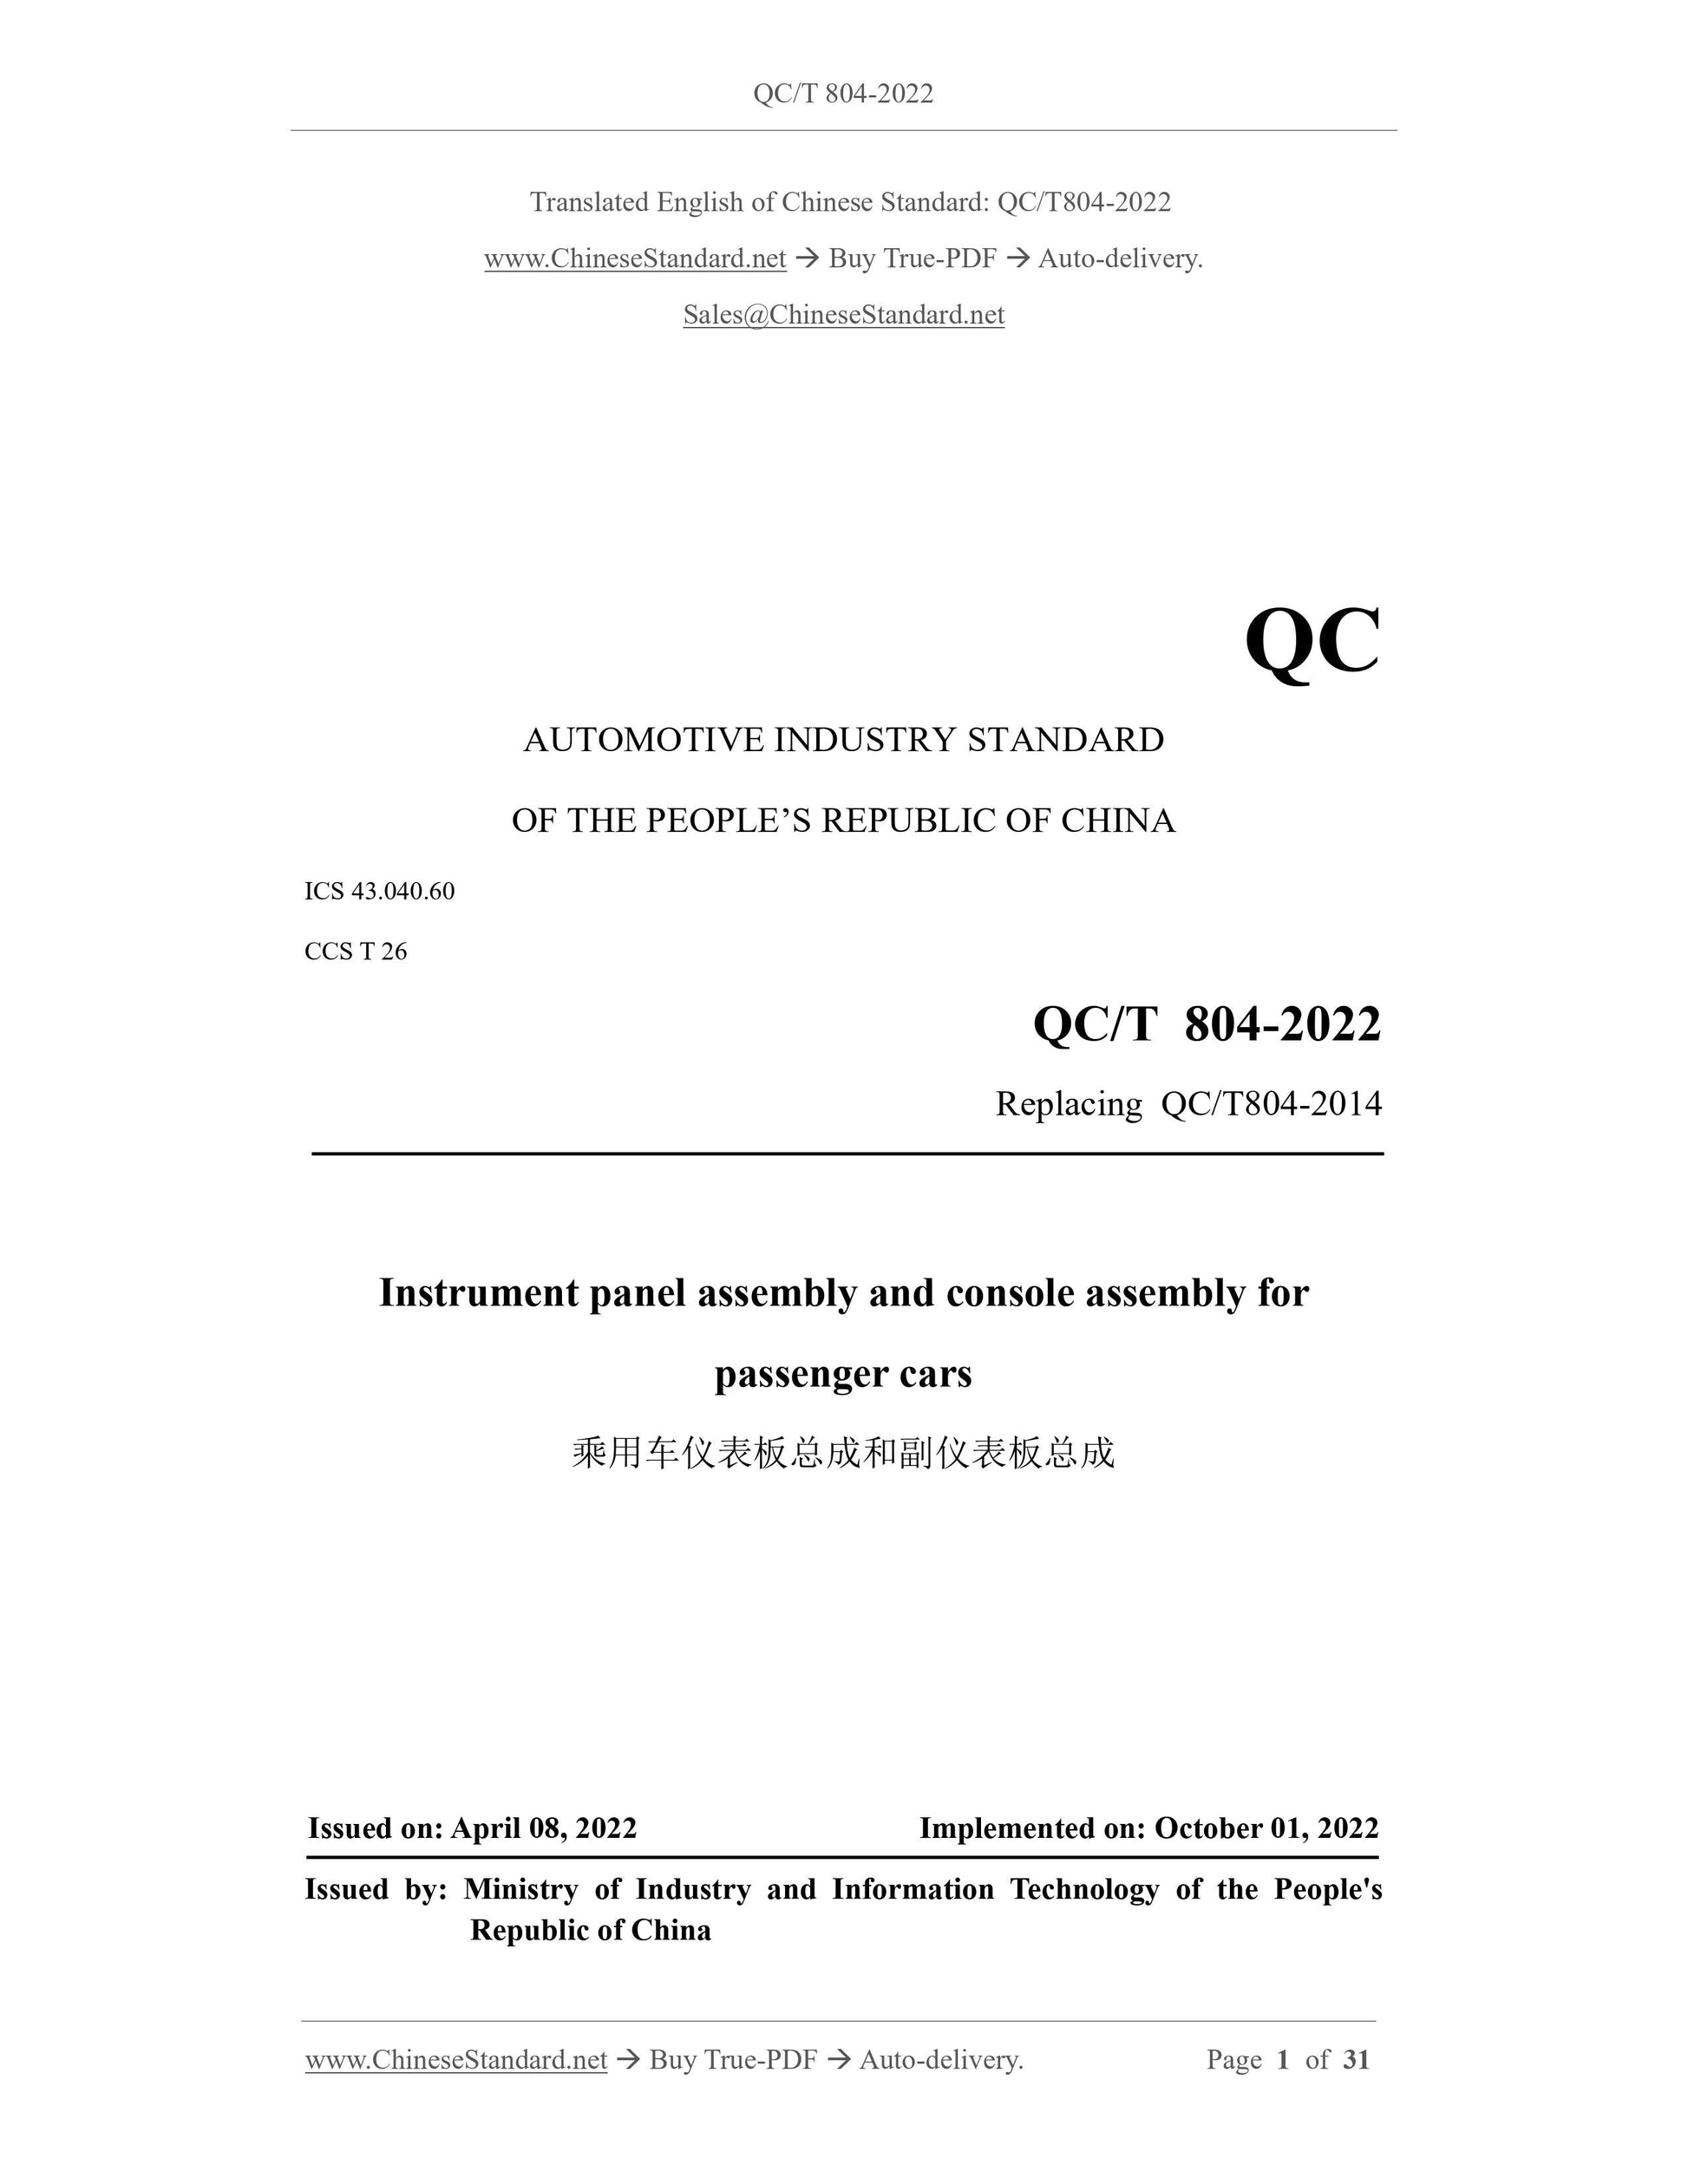 QC/T 804-2022 Page 1